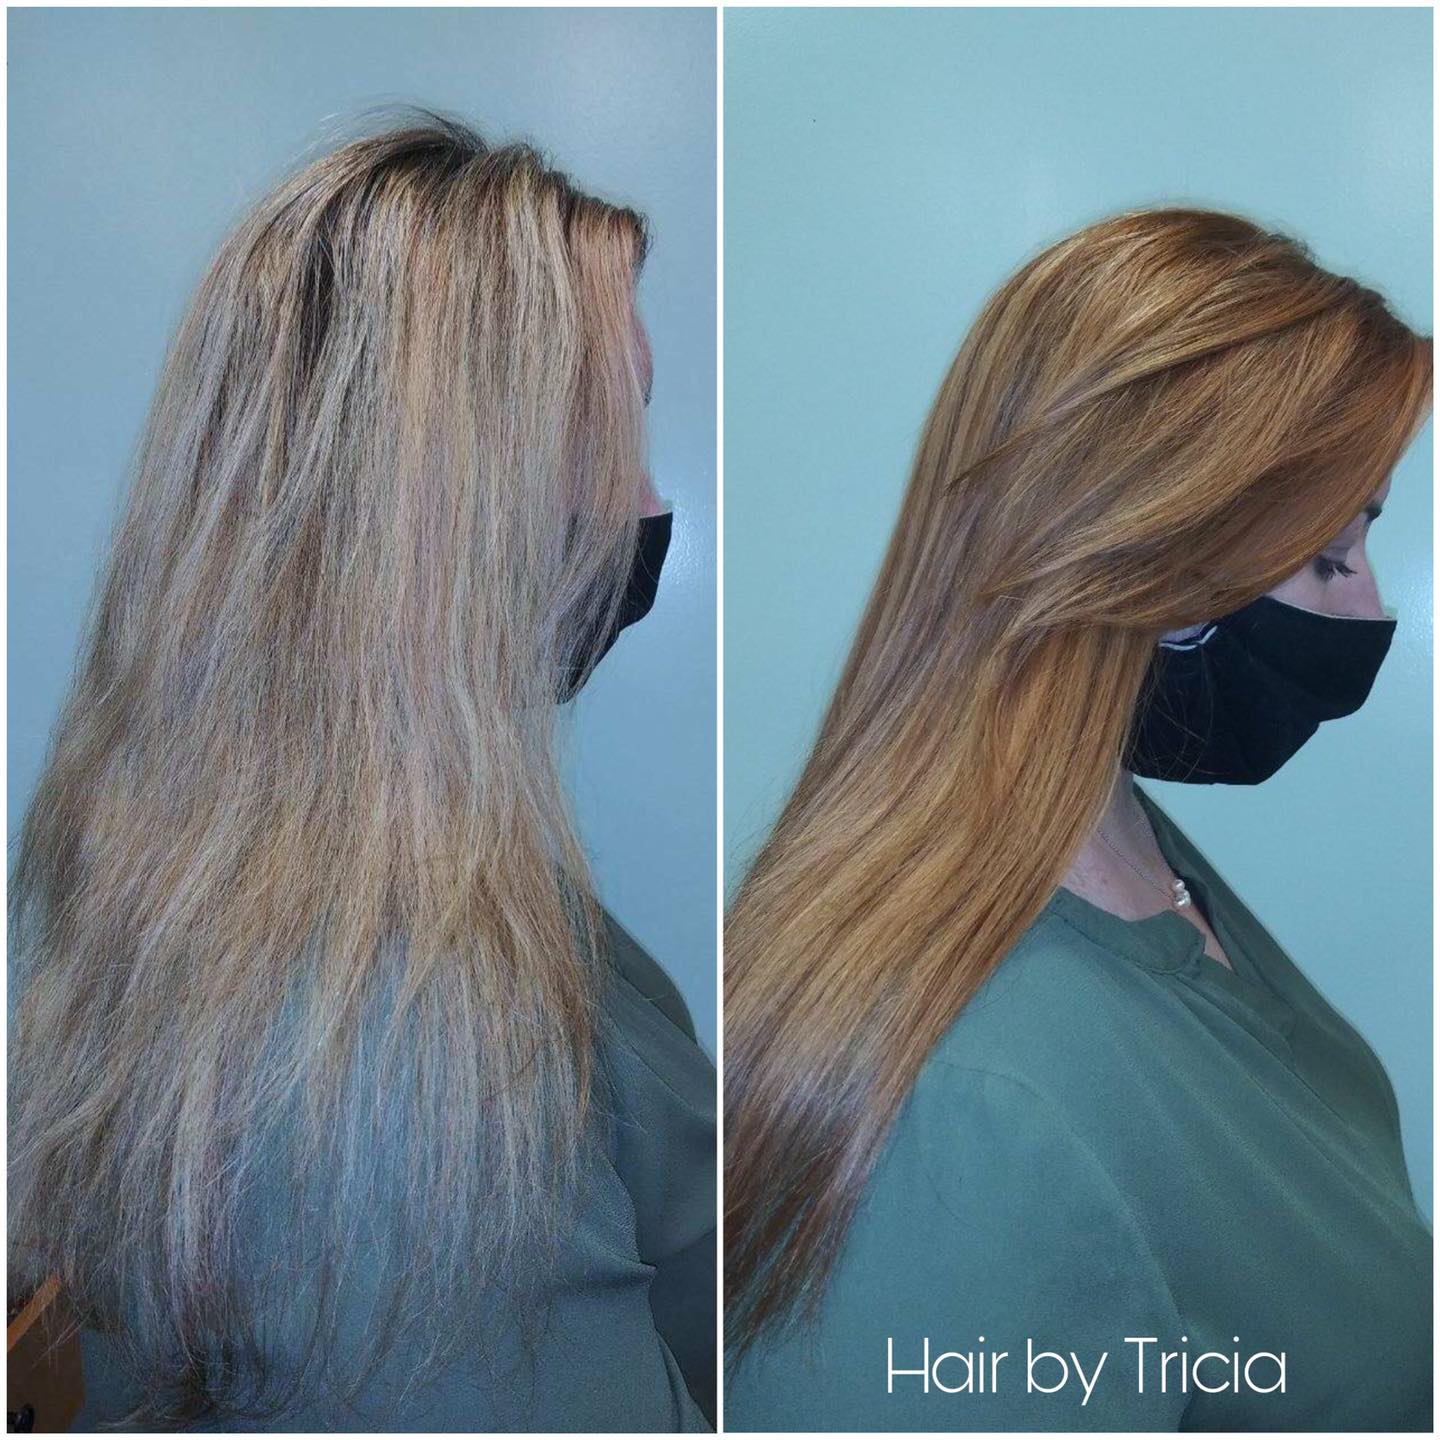 Check out this before and after by Tricia! ✨